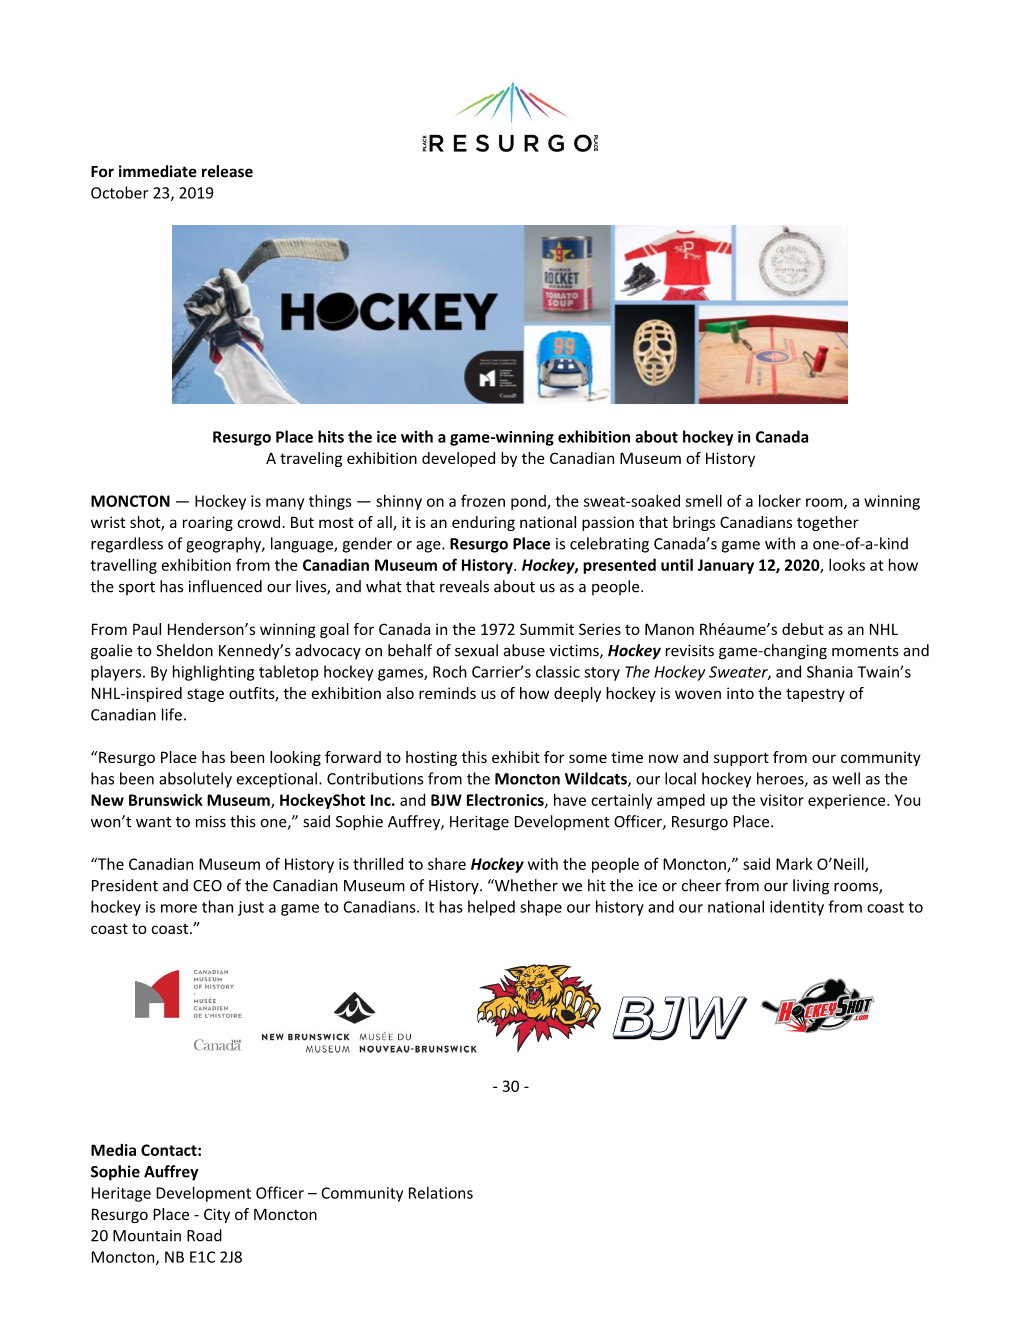 For Immediate Release October 23, 2019 Resurgo Place Hits the Ice with a Game-Winning Exhibition About Hockey in Canada a Travel